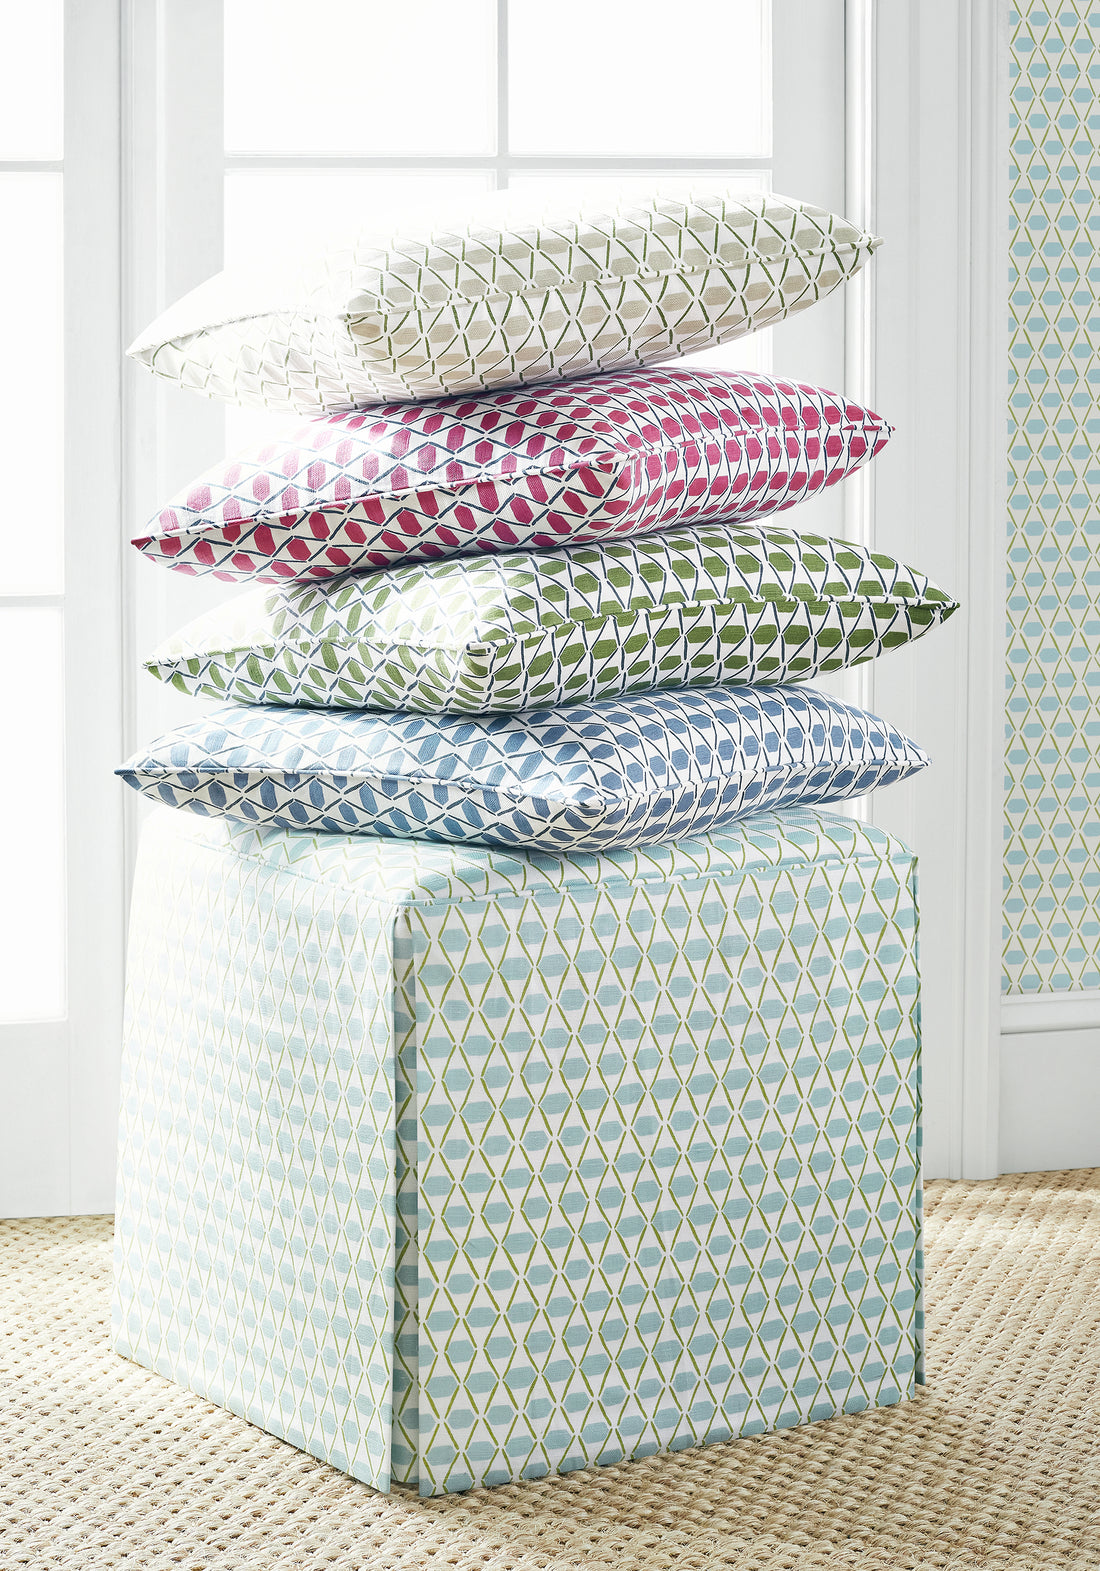 Pillow made with Thibaut Denver fabric in green and blue color - pattern F914327